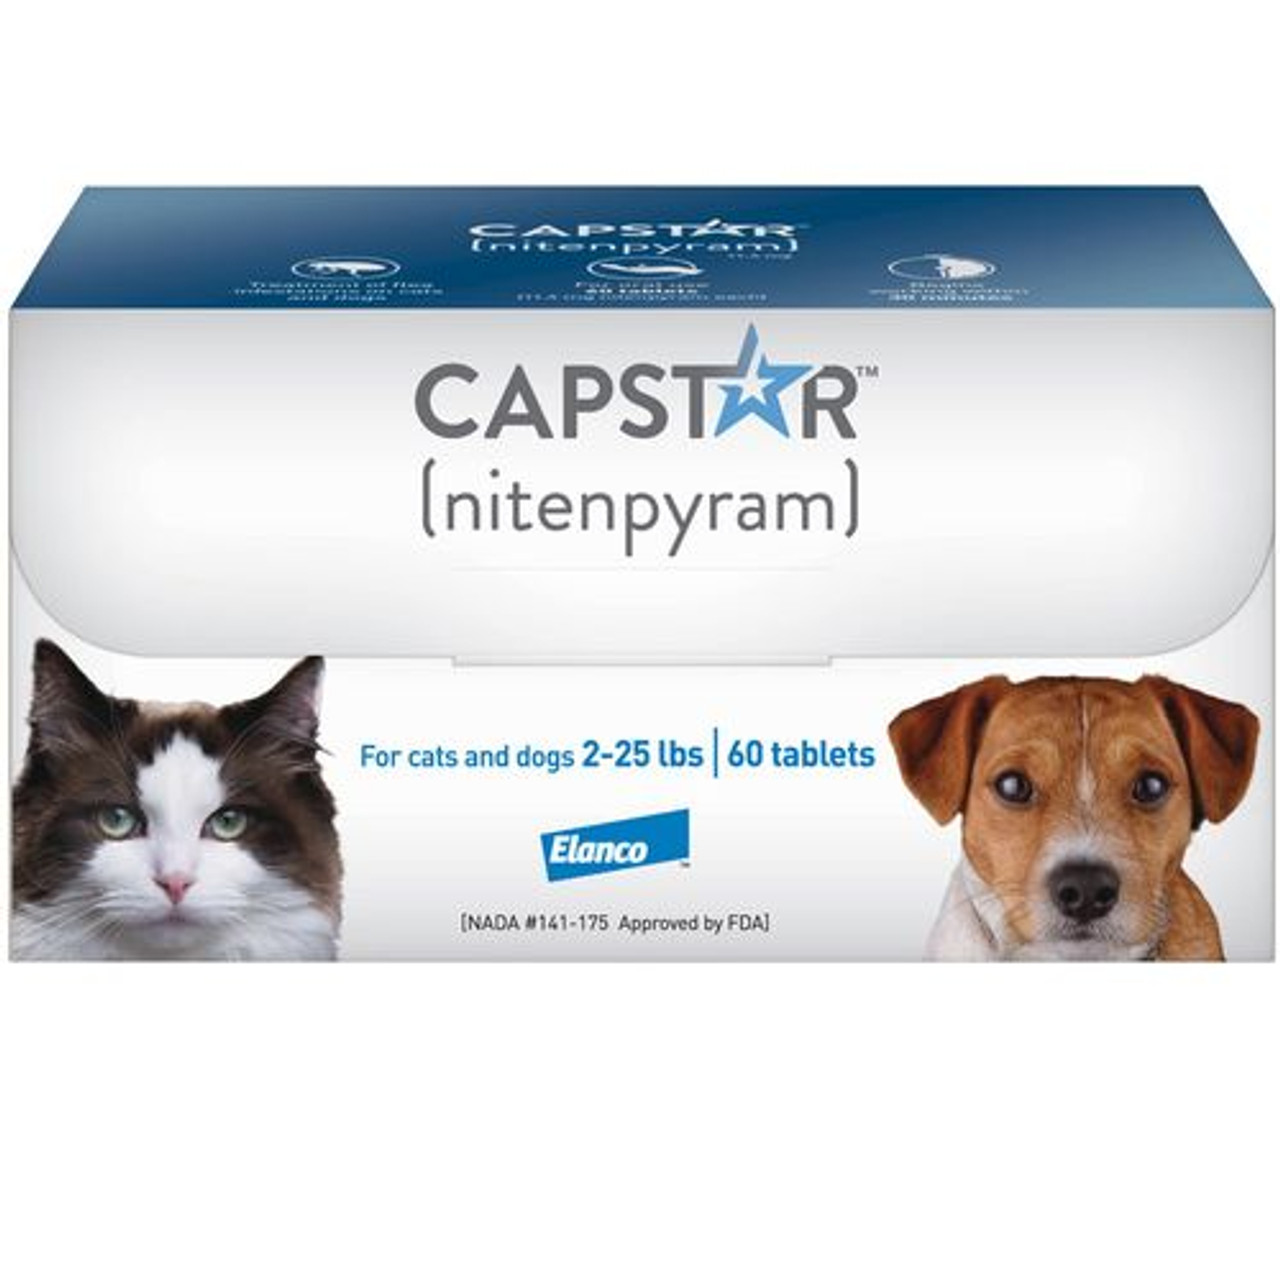 Capstar Flea Tablets for Dogs & Cats